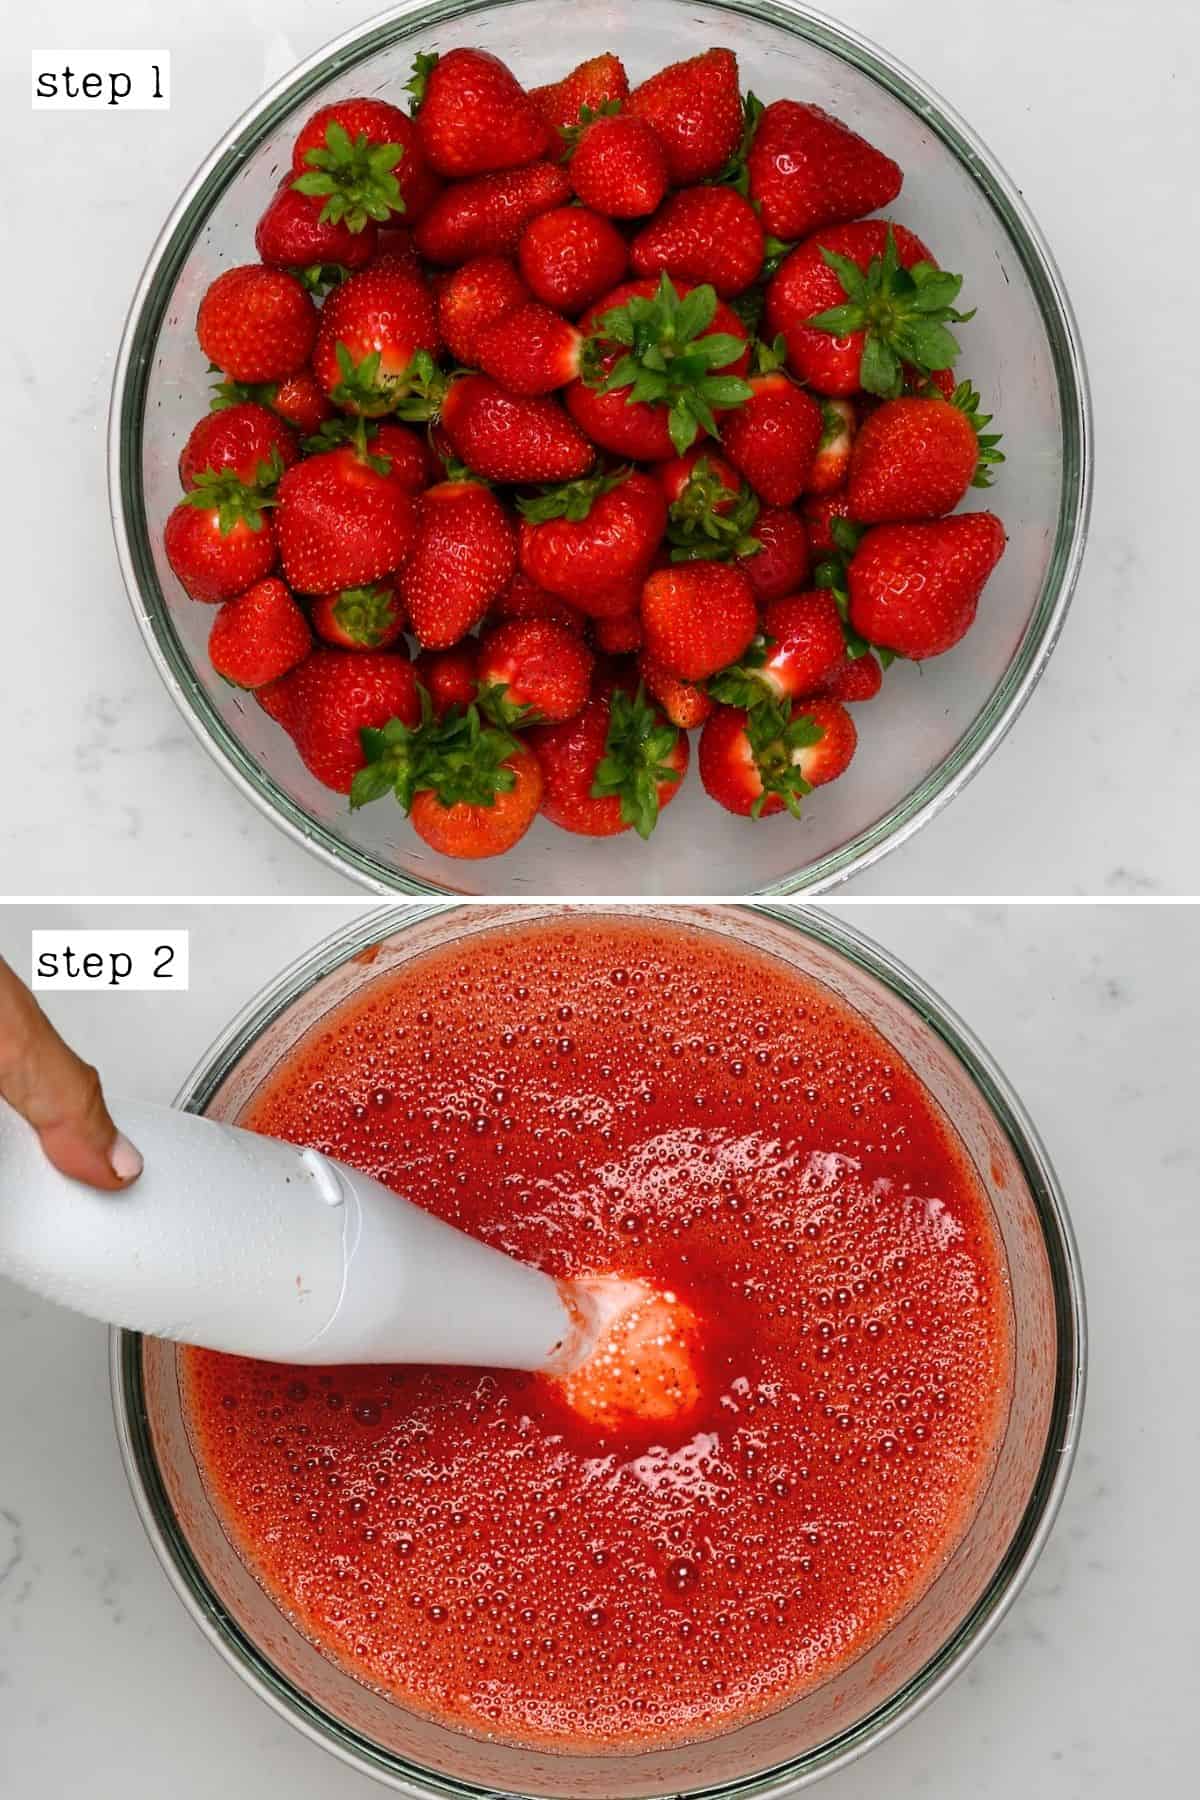 Steps for making strawberry juice